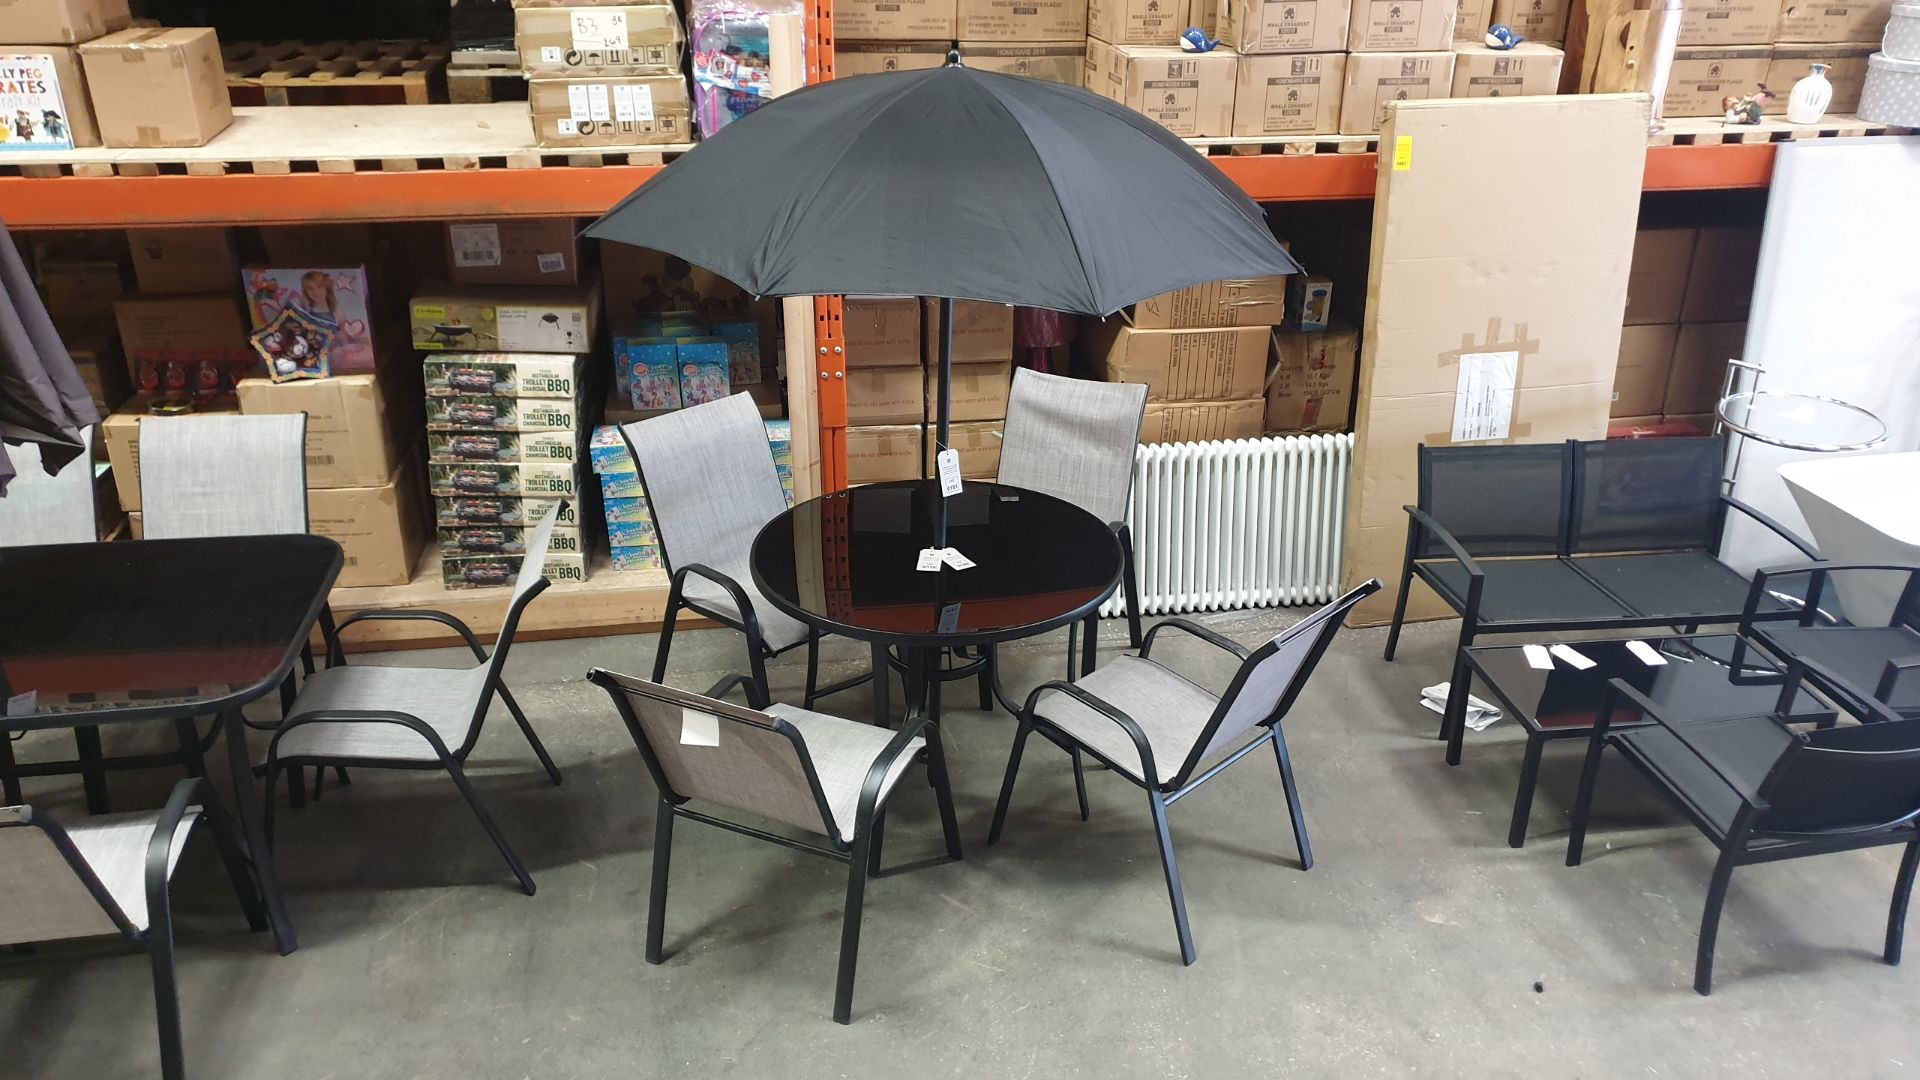 (LOT FOR THURSDAY 28TH MAY AUCTION) 6 PC GARDEN SET IN BLACK / GREY POWDER COATING COMPRISING